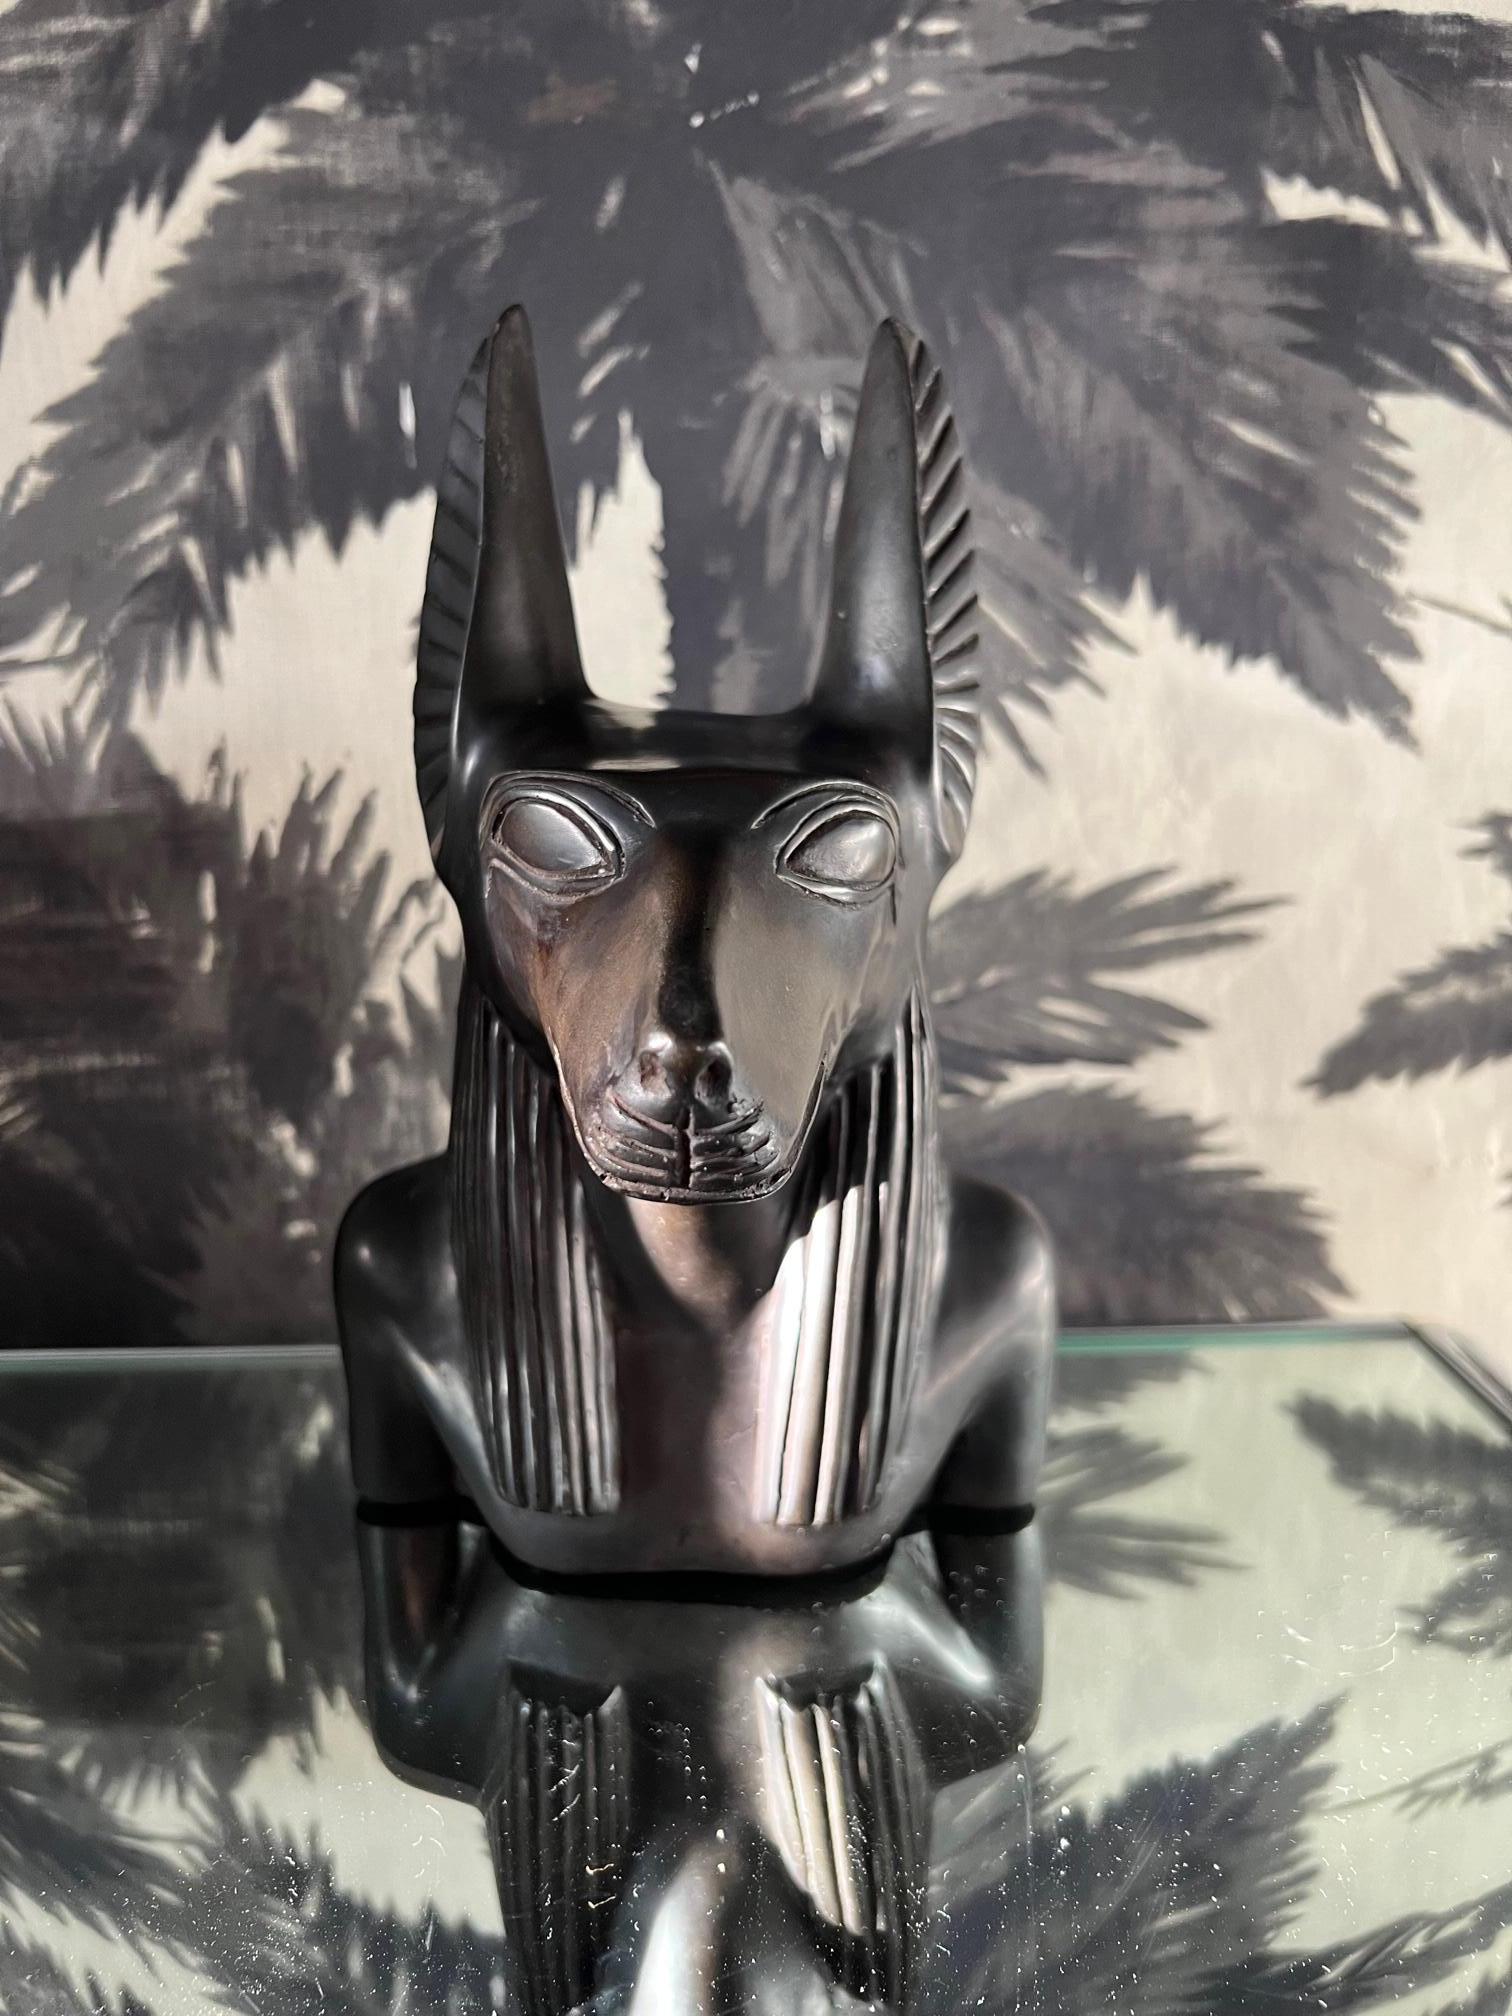 Egyptian Revival Vintage Sculpture of Egyptian God Anubis in Black Resin Marble, c. 1985